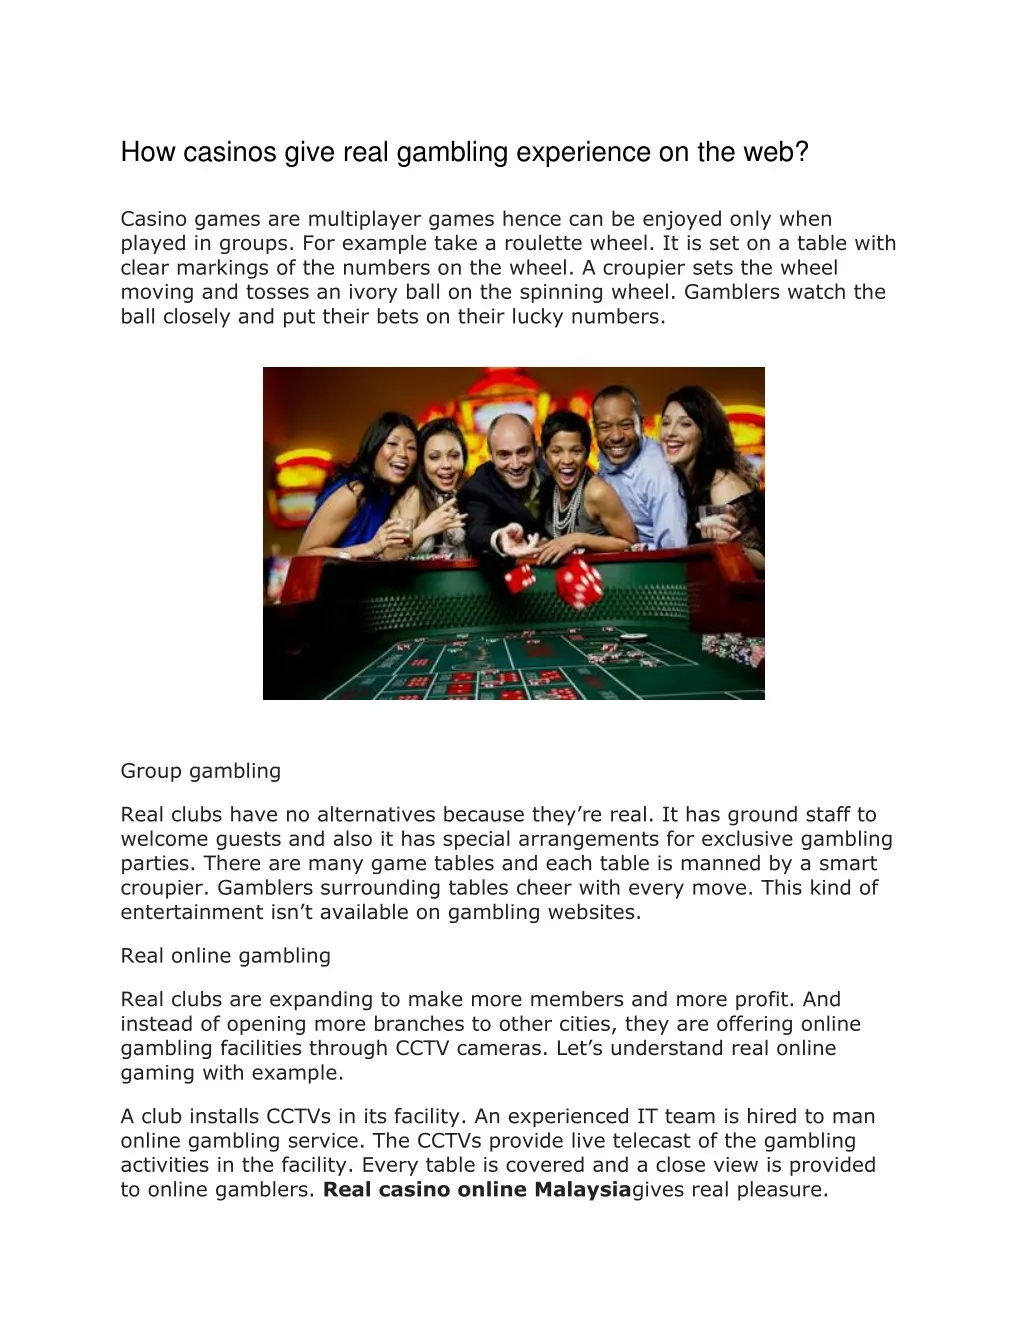 how casinos give real gambling experience